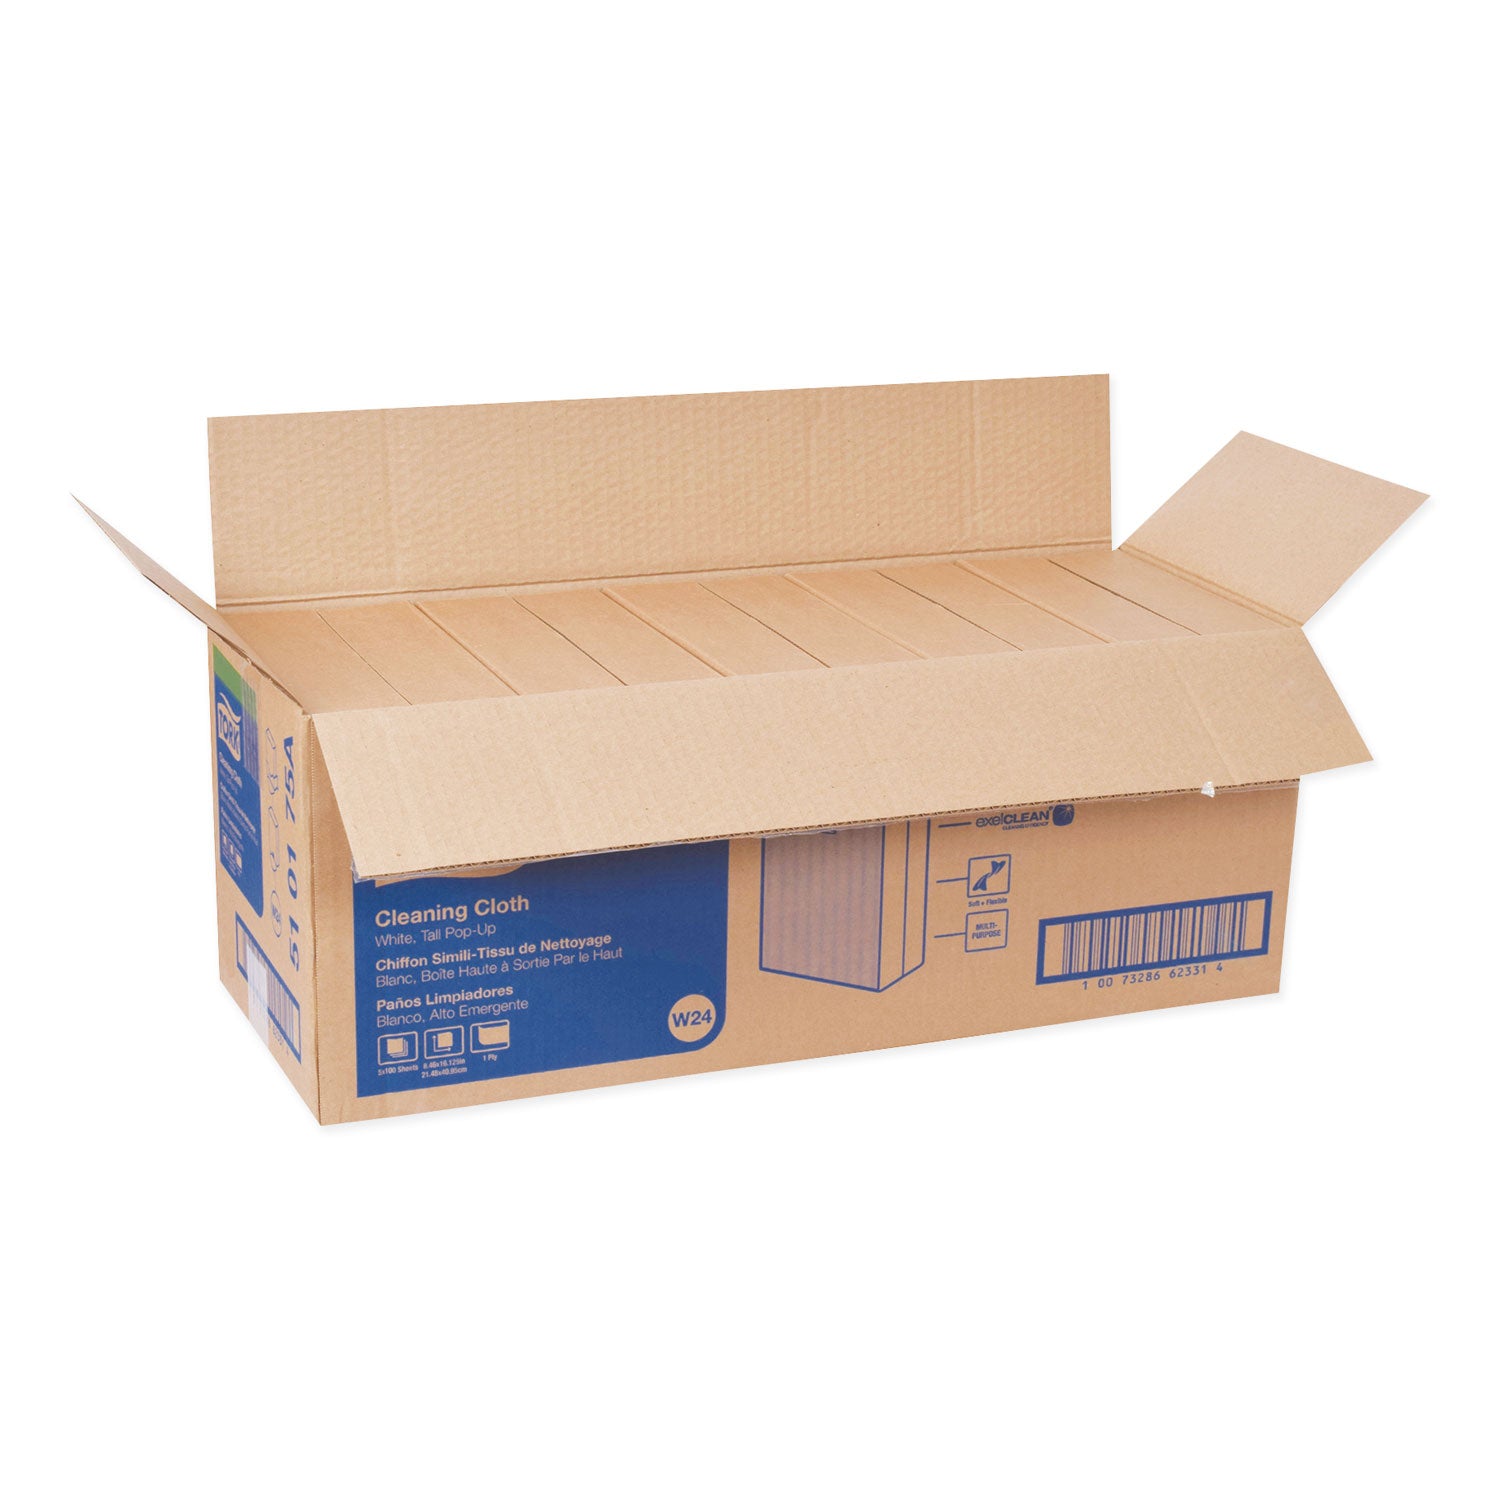 heavy-duty-cleaning-cloth-846-x-1613-white-80-box-5-boxes-carton_trk5301755 - 3